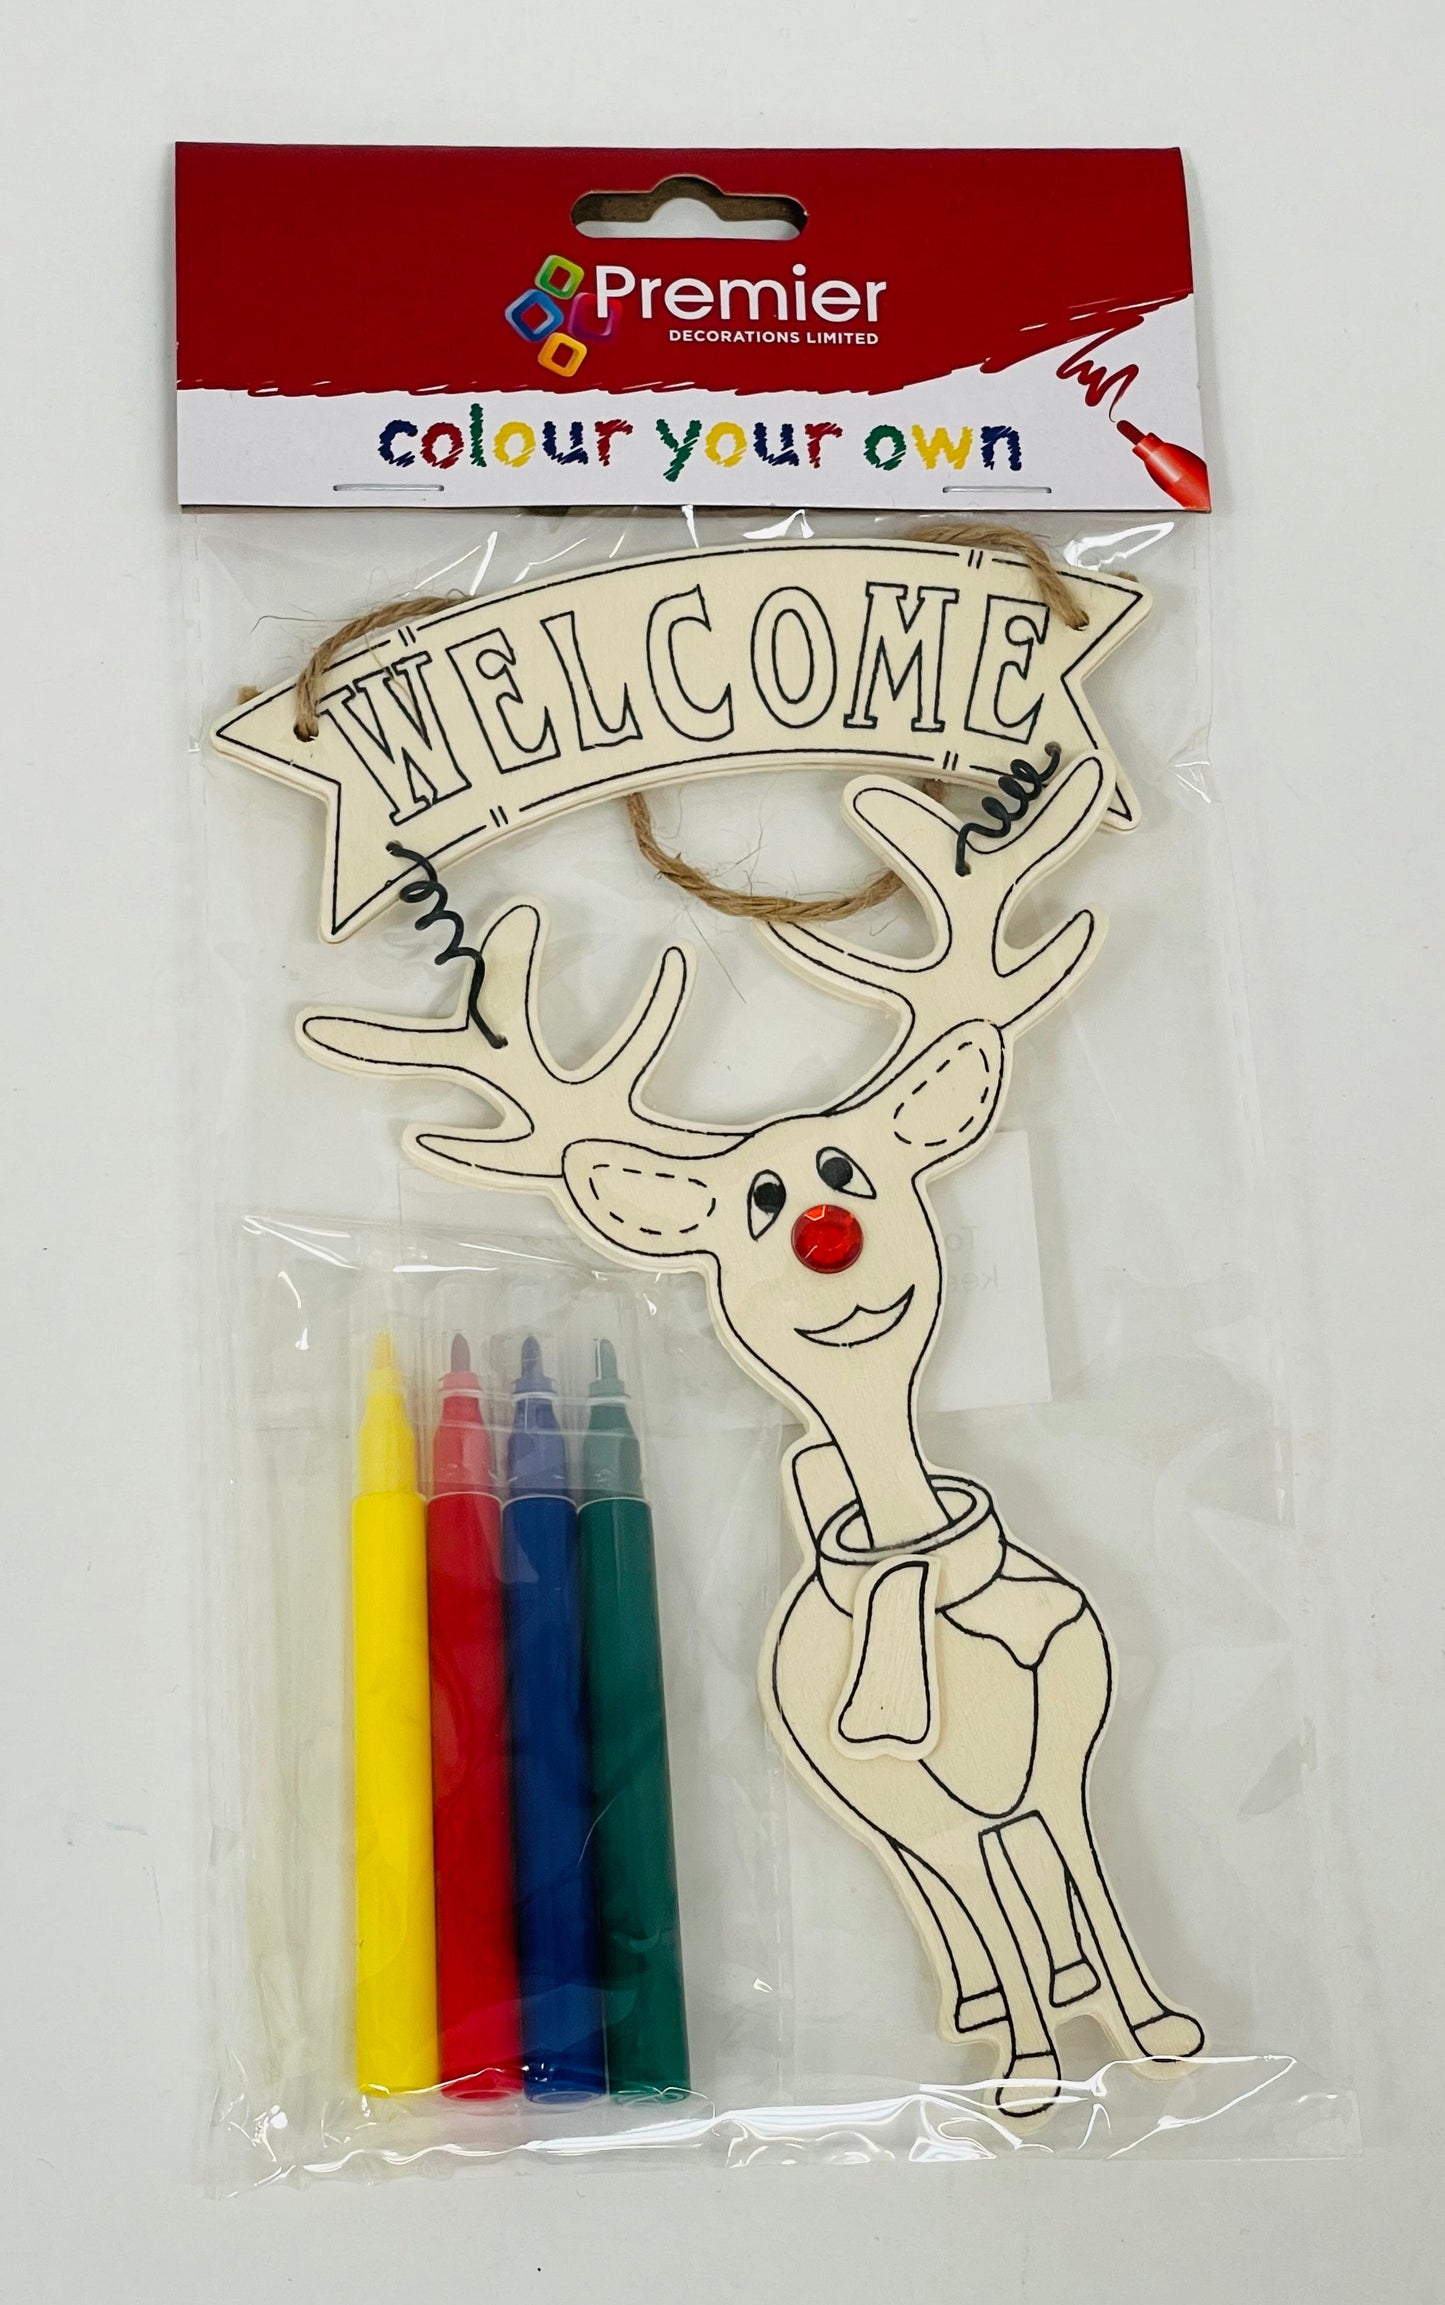 Colouring wooden Tree Decorations